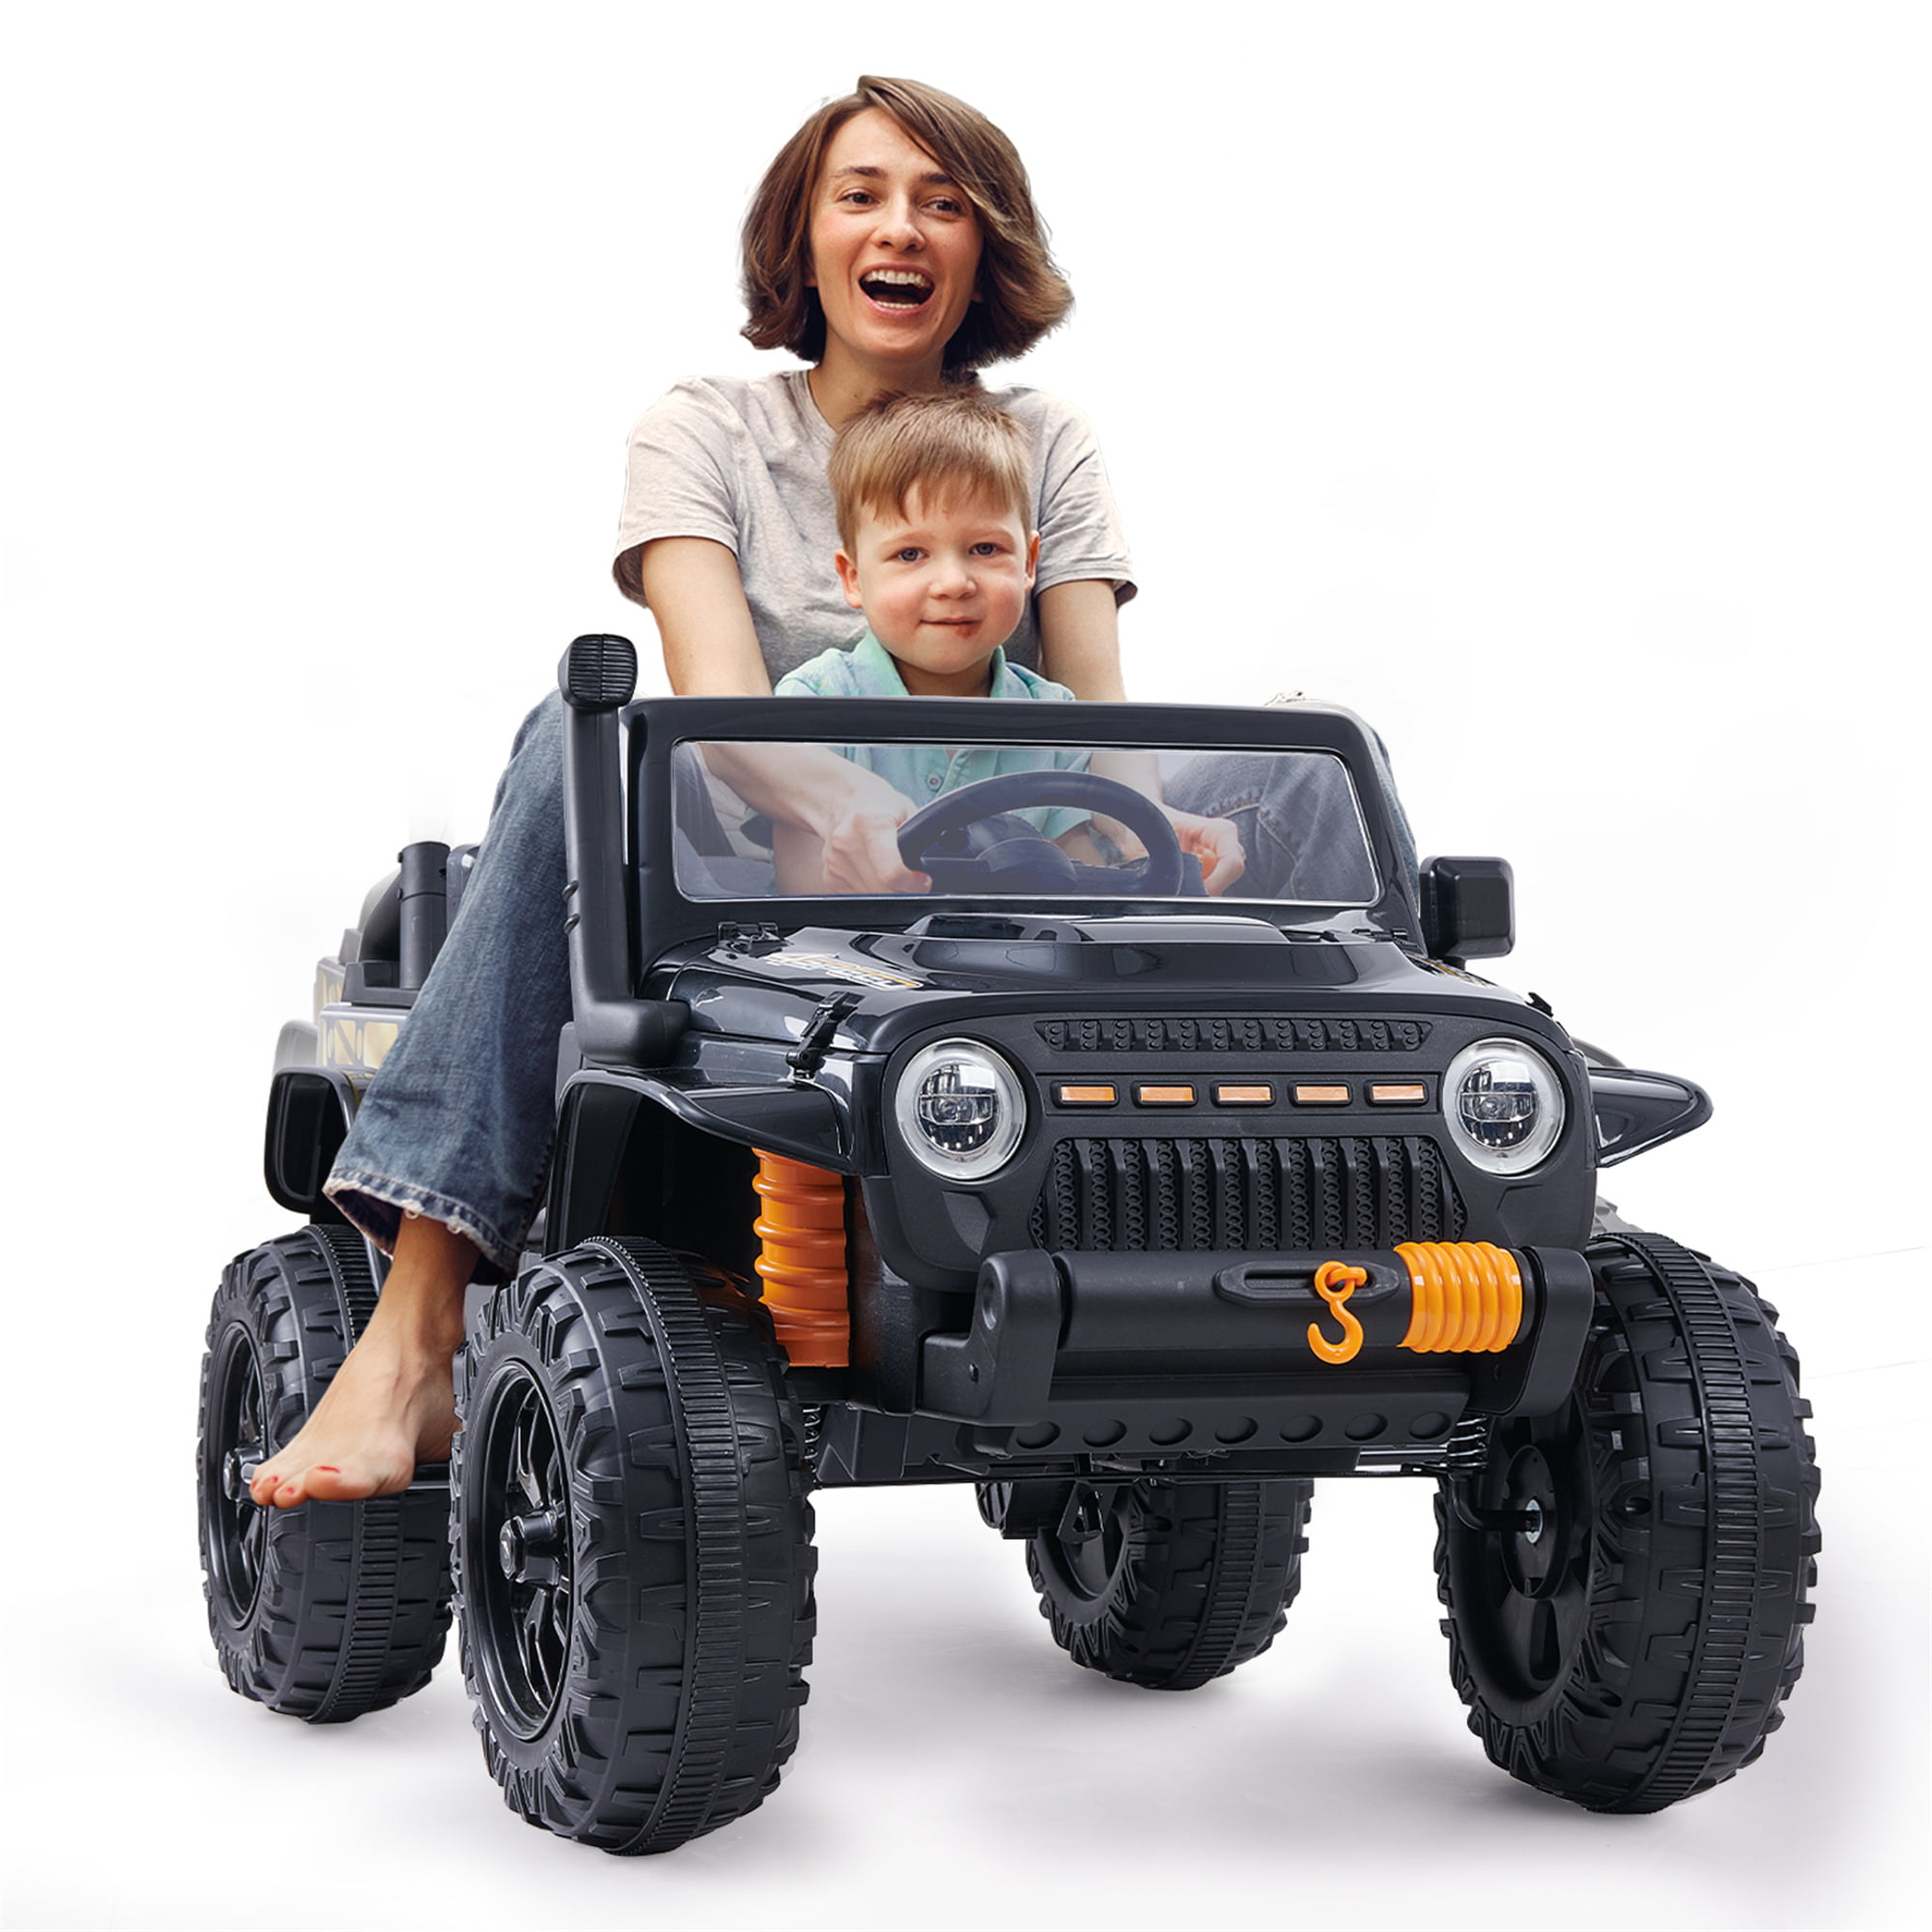 12V MP3 Kids Ride On Car Truck with Remote Control 3 Speed LED Lights Black 